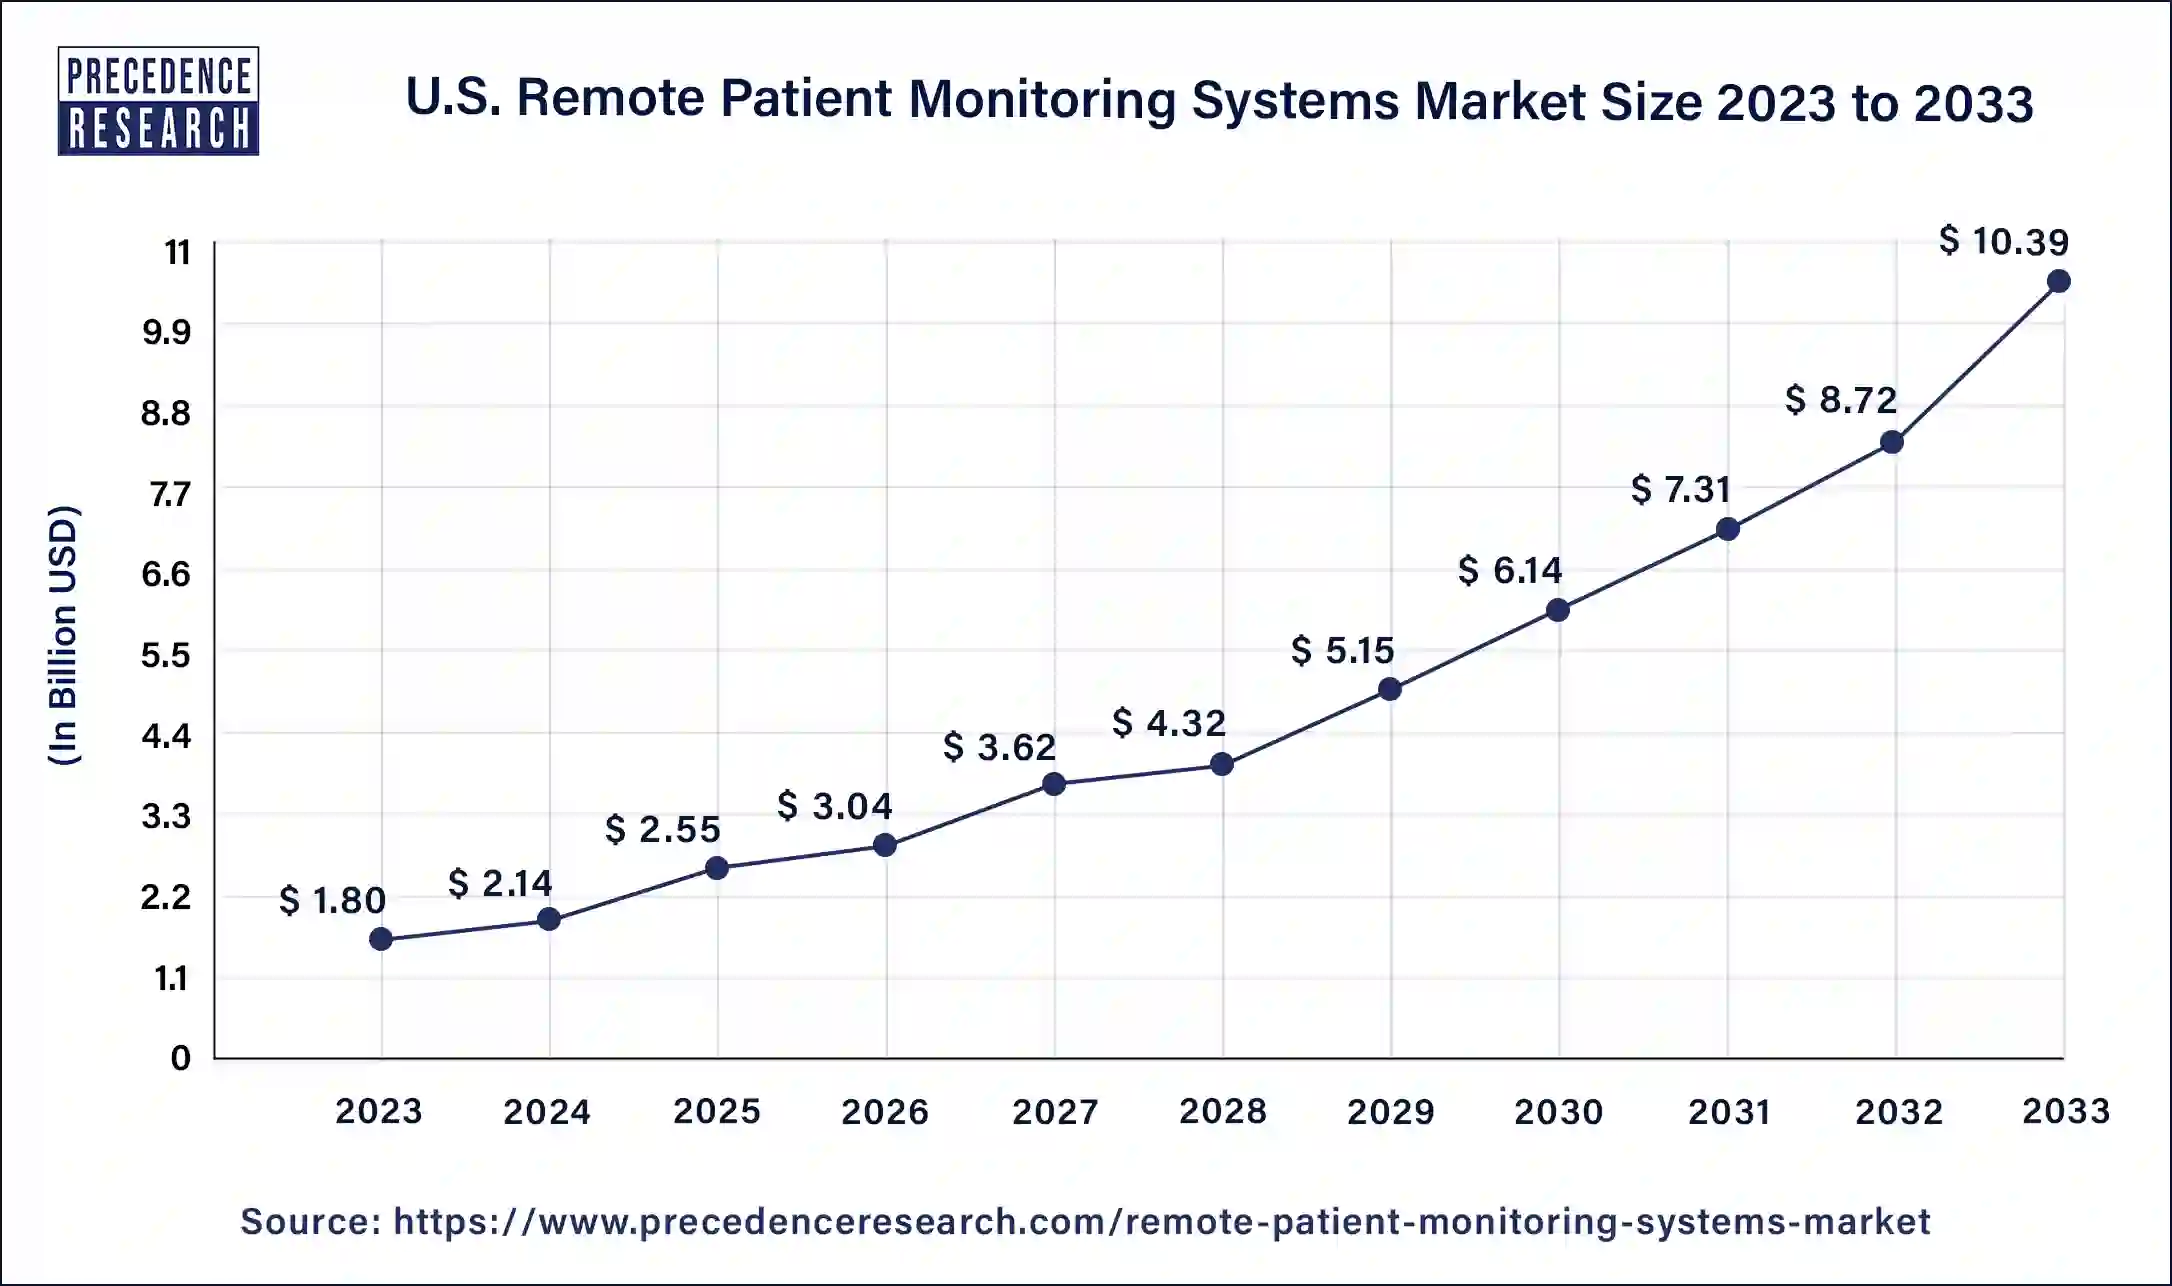 U.S. Remote Patient Monitoring Systems Market Size 2024 to 2033